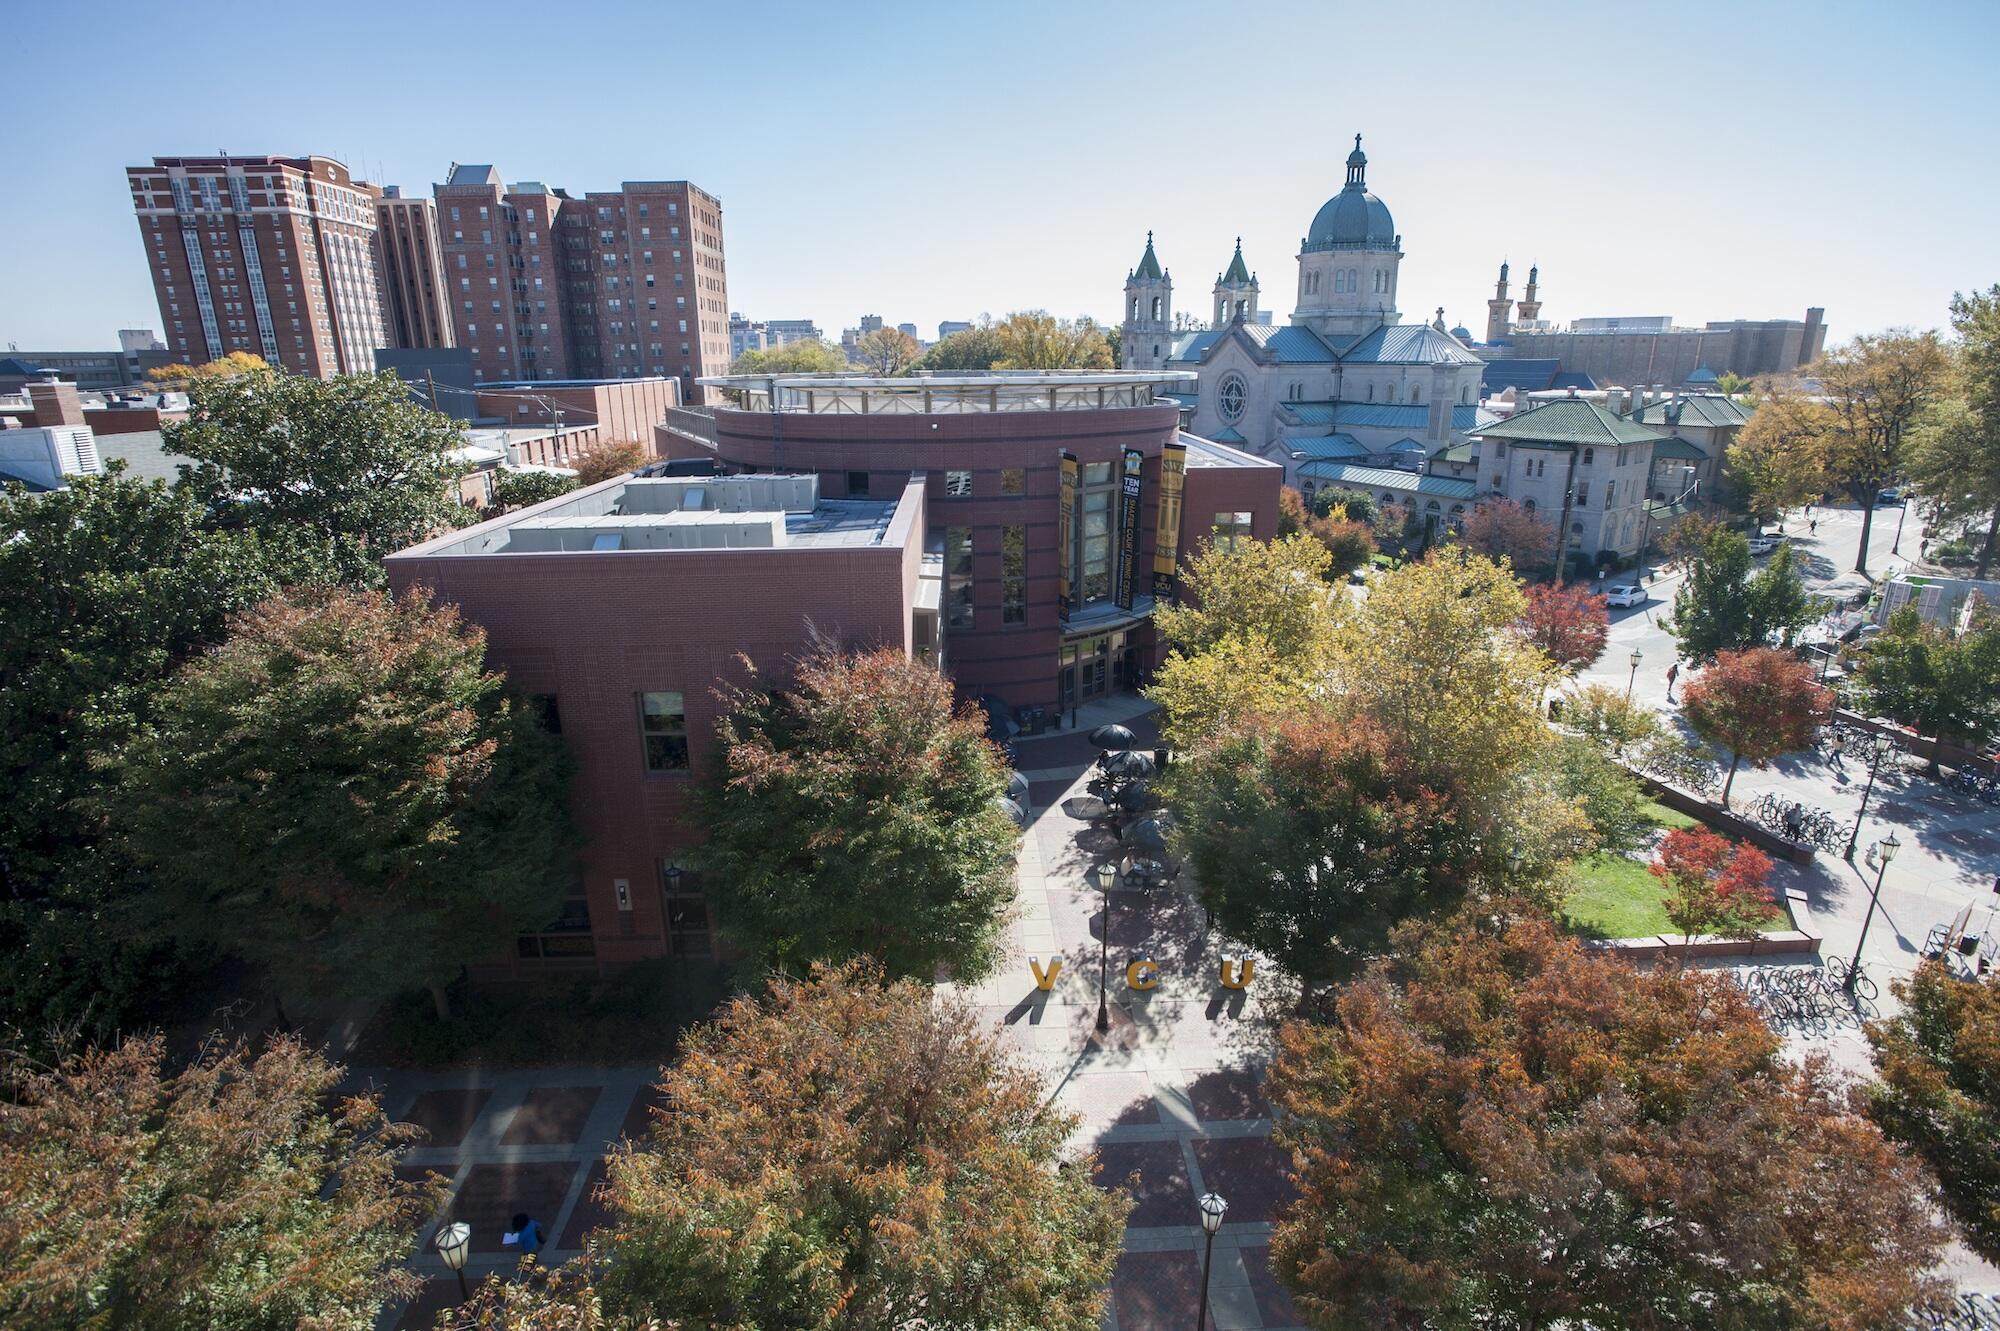 VCU Monroe Park Campus from above